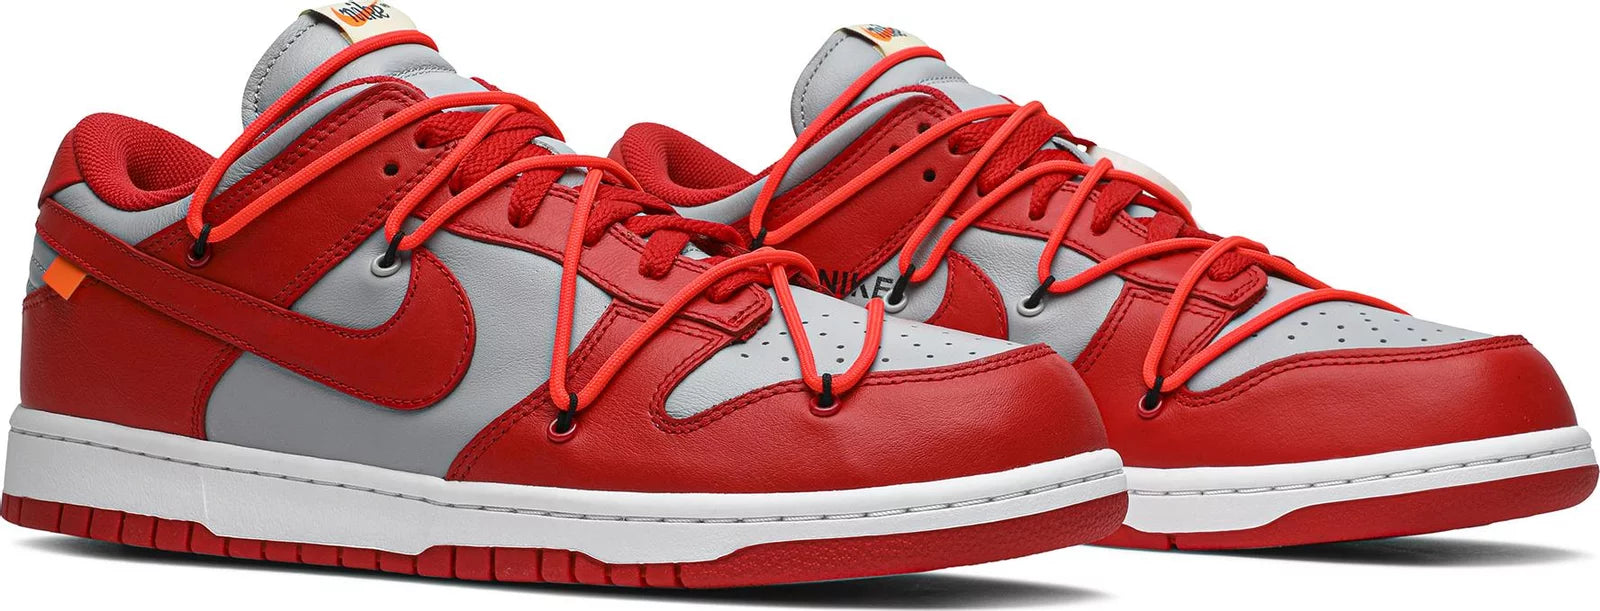 Nike Dunk Low Off-White University Red (Worn Once)